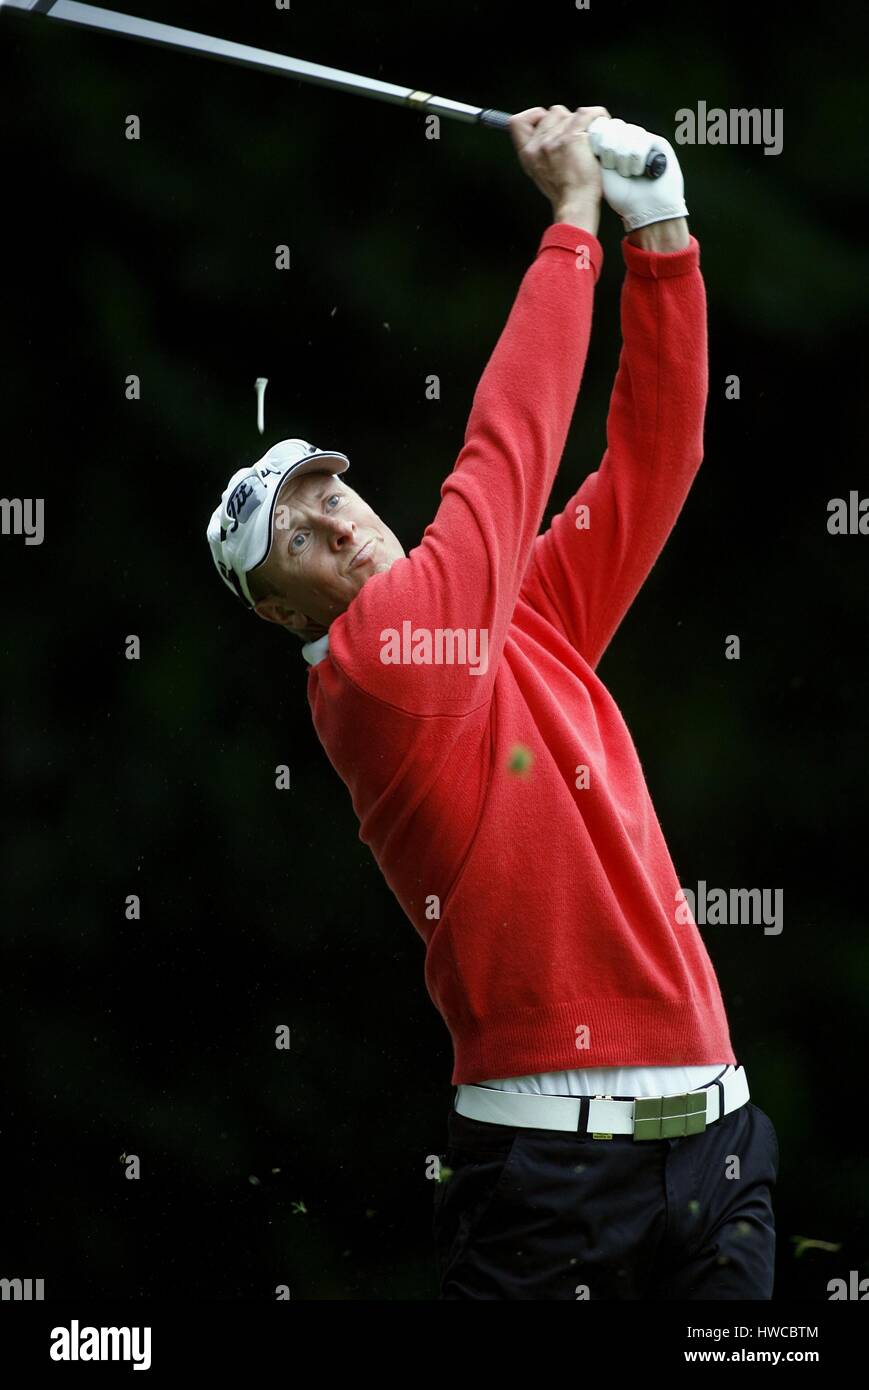 FREDRIK ANDERSSON HED SWEDEN WENTWORTH CLUB SURREY ENGLAND 26 May 2007 Stock Photo